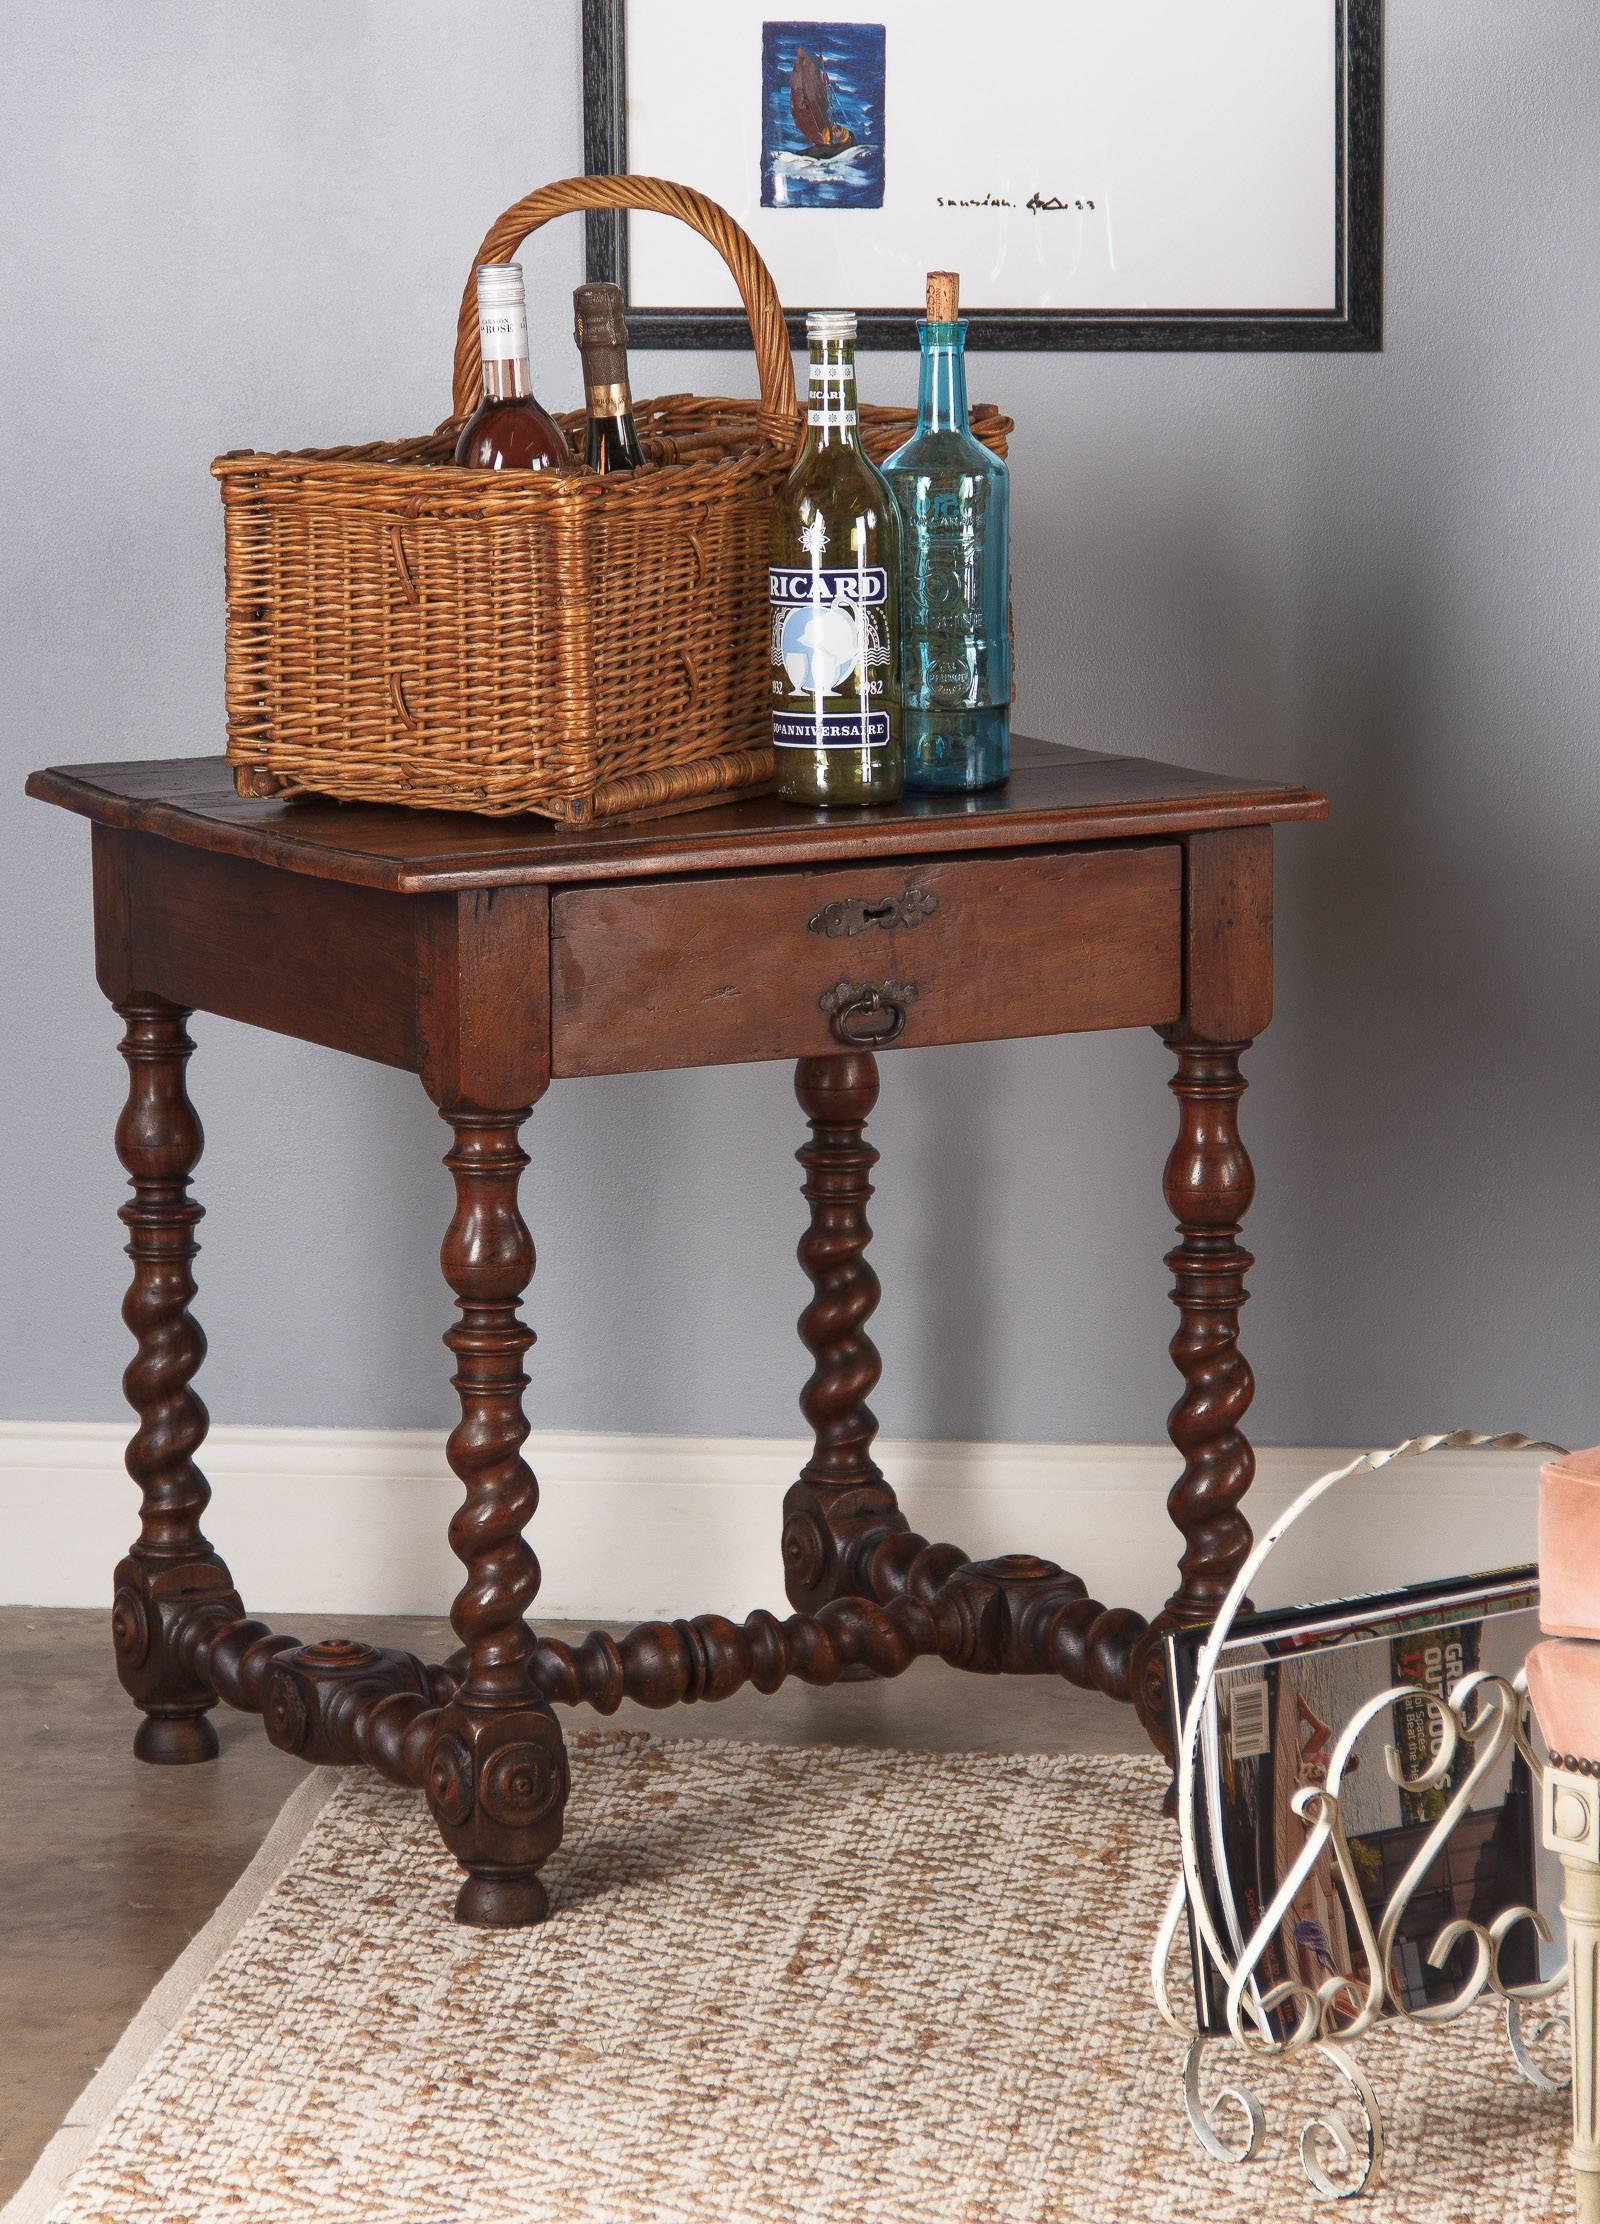 A French country wicker basket bottle holder with wicker wrapped handle. Using stacked and wicker-bound sticks, the basket is divided into eight separate compartments suitable for carrying bottles. Nicely aged with a lovely tan patina. The basket is